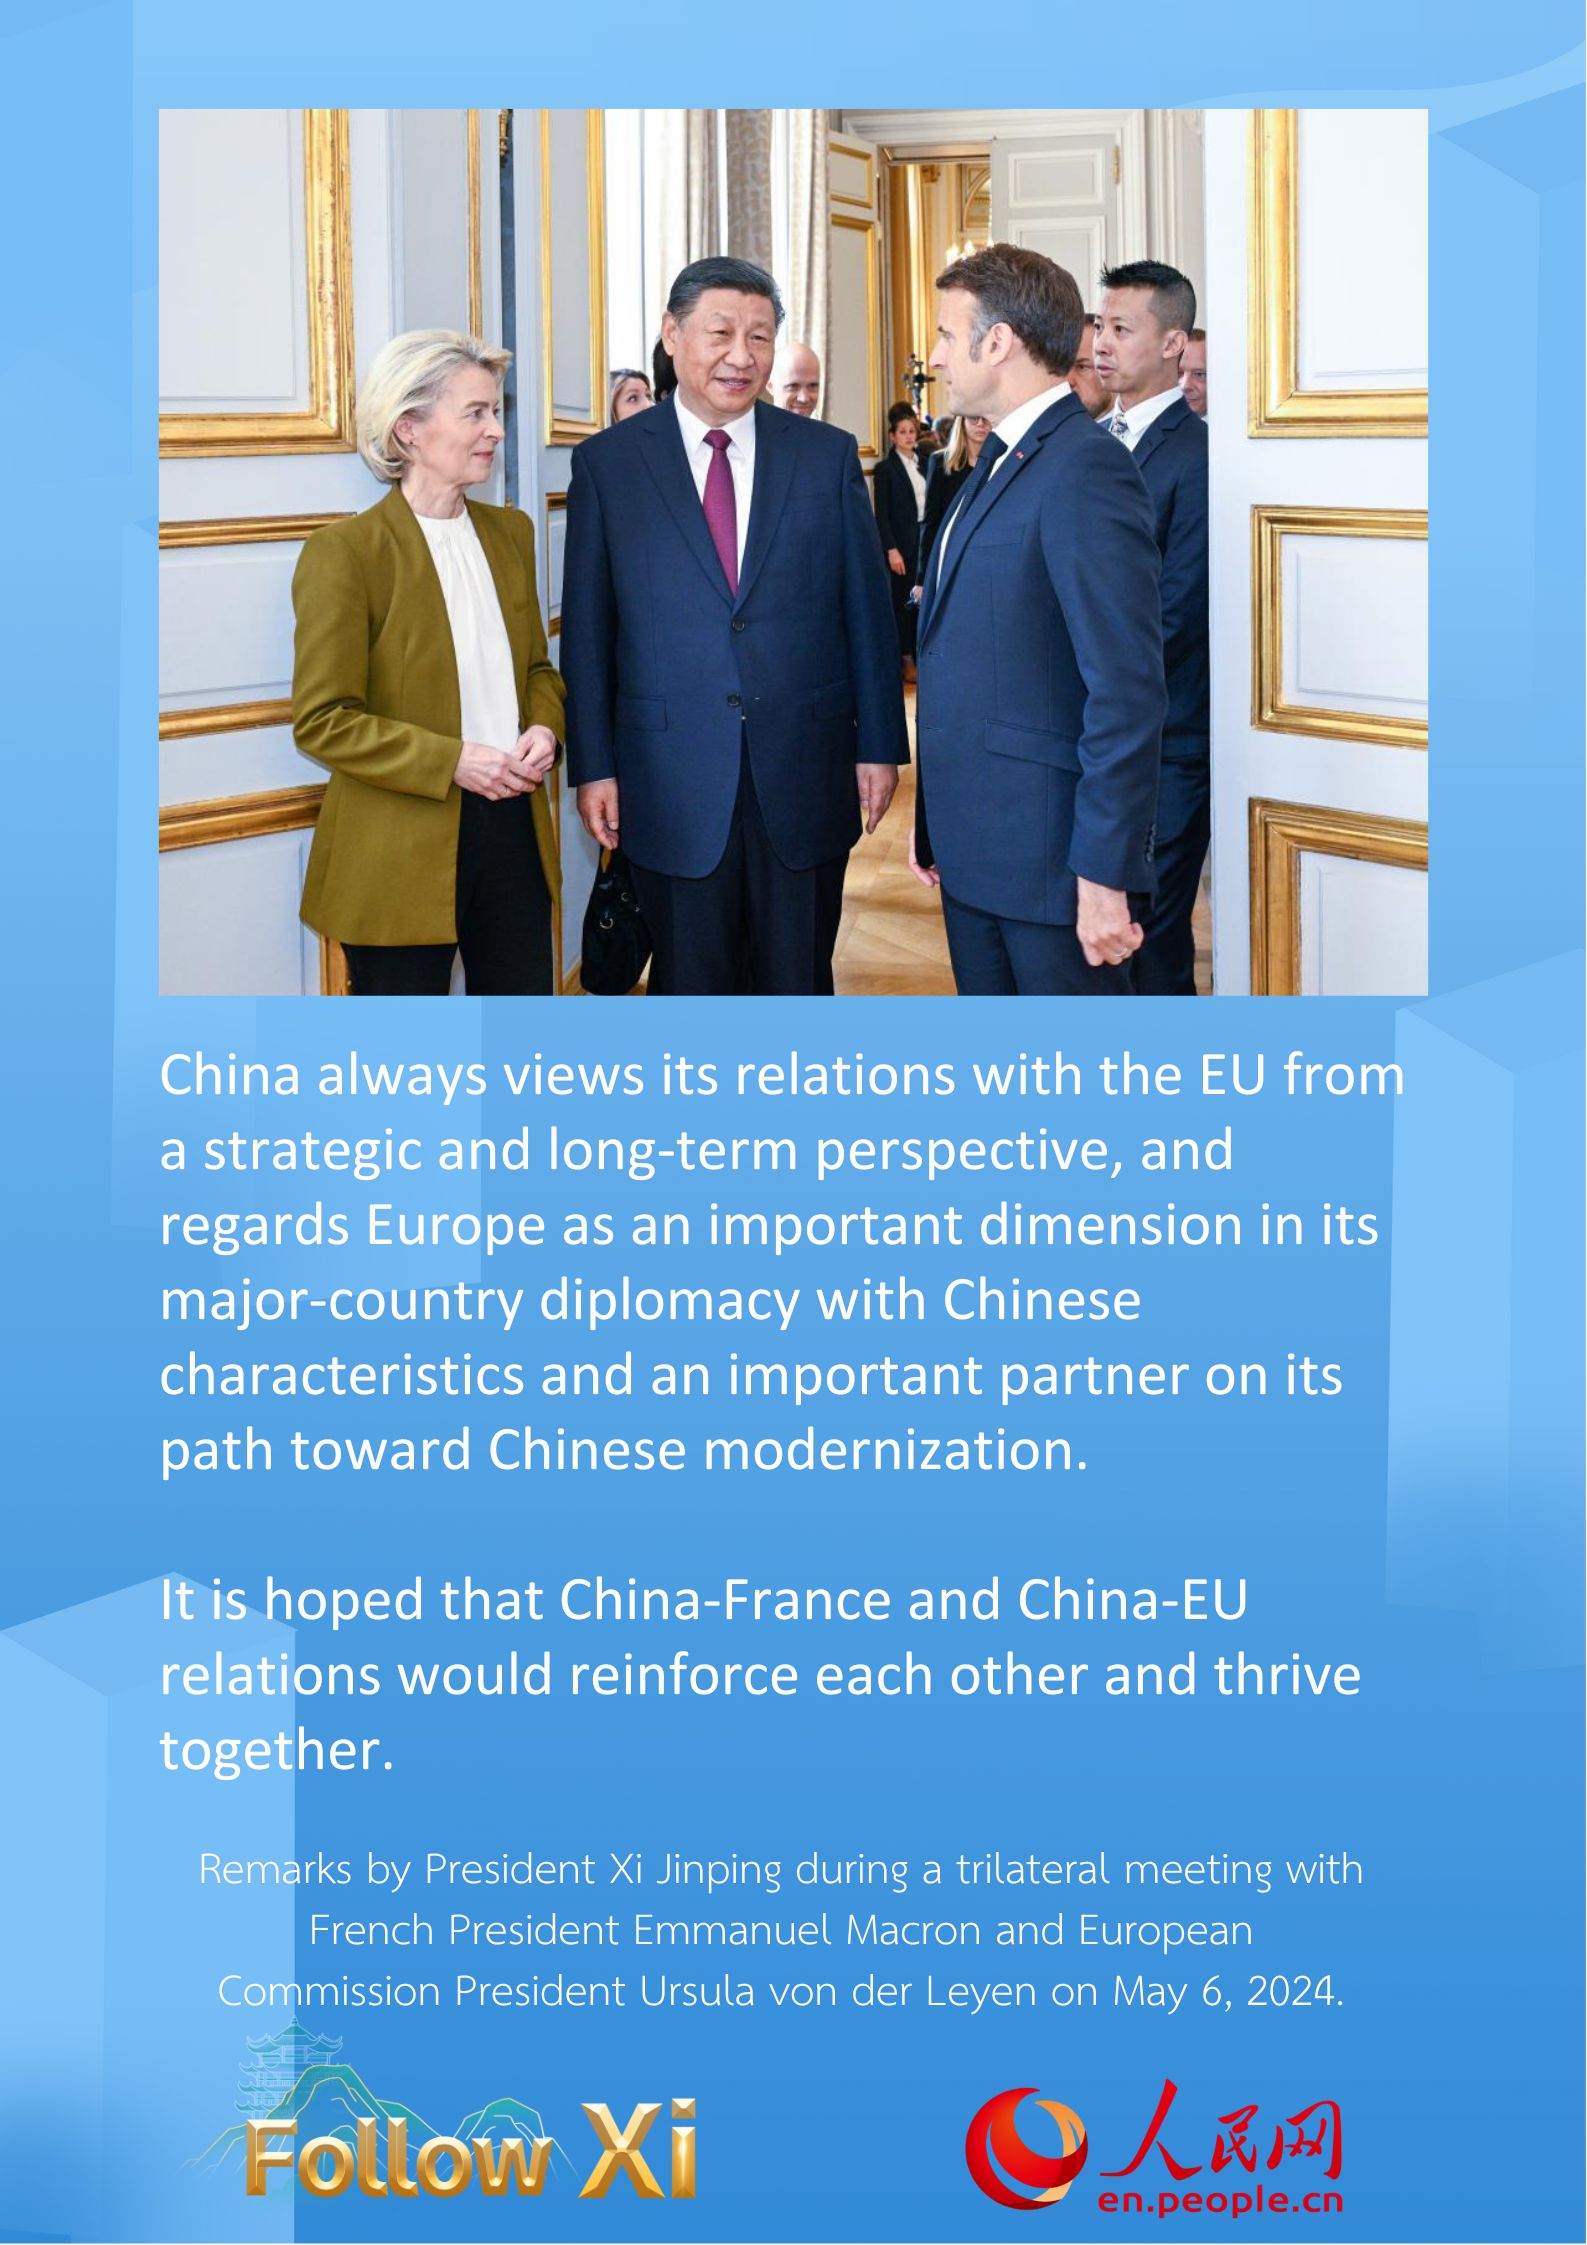 Highlights of President Xi’s remarks when he meets with French and European leaders